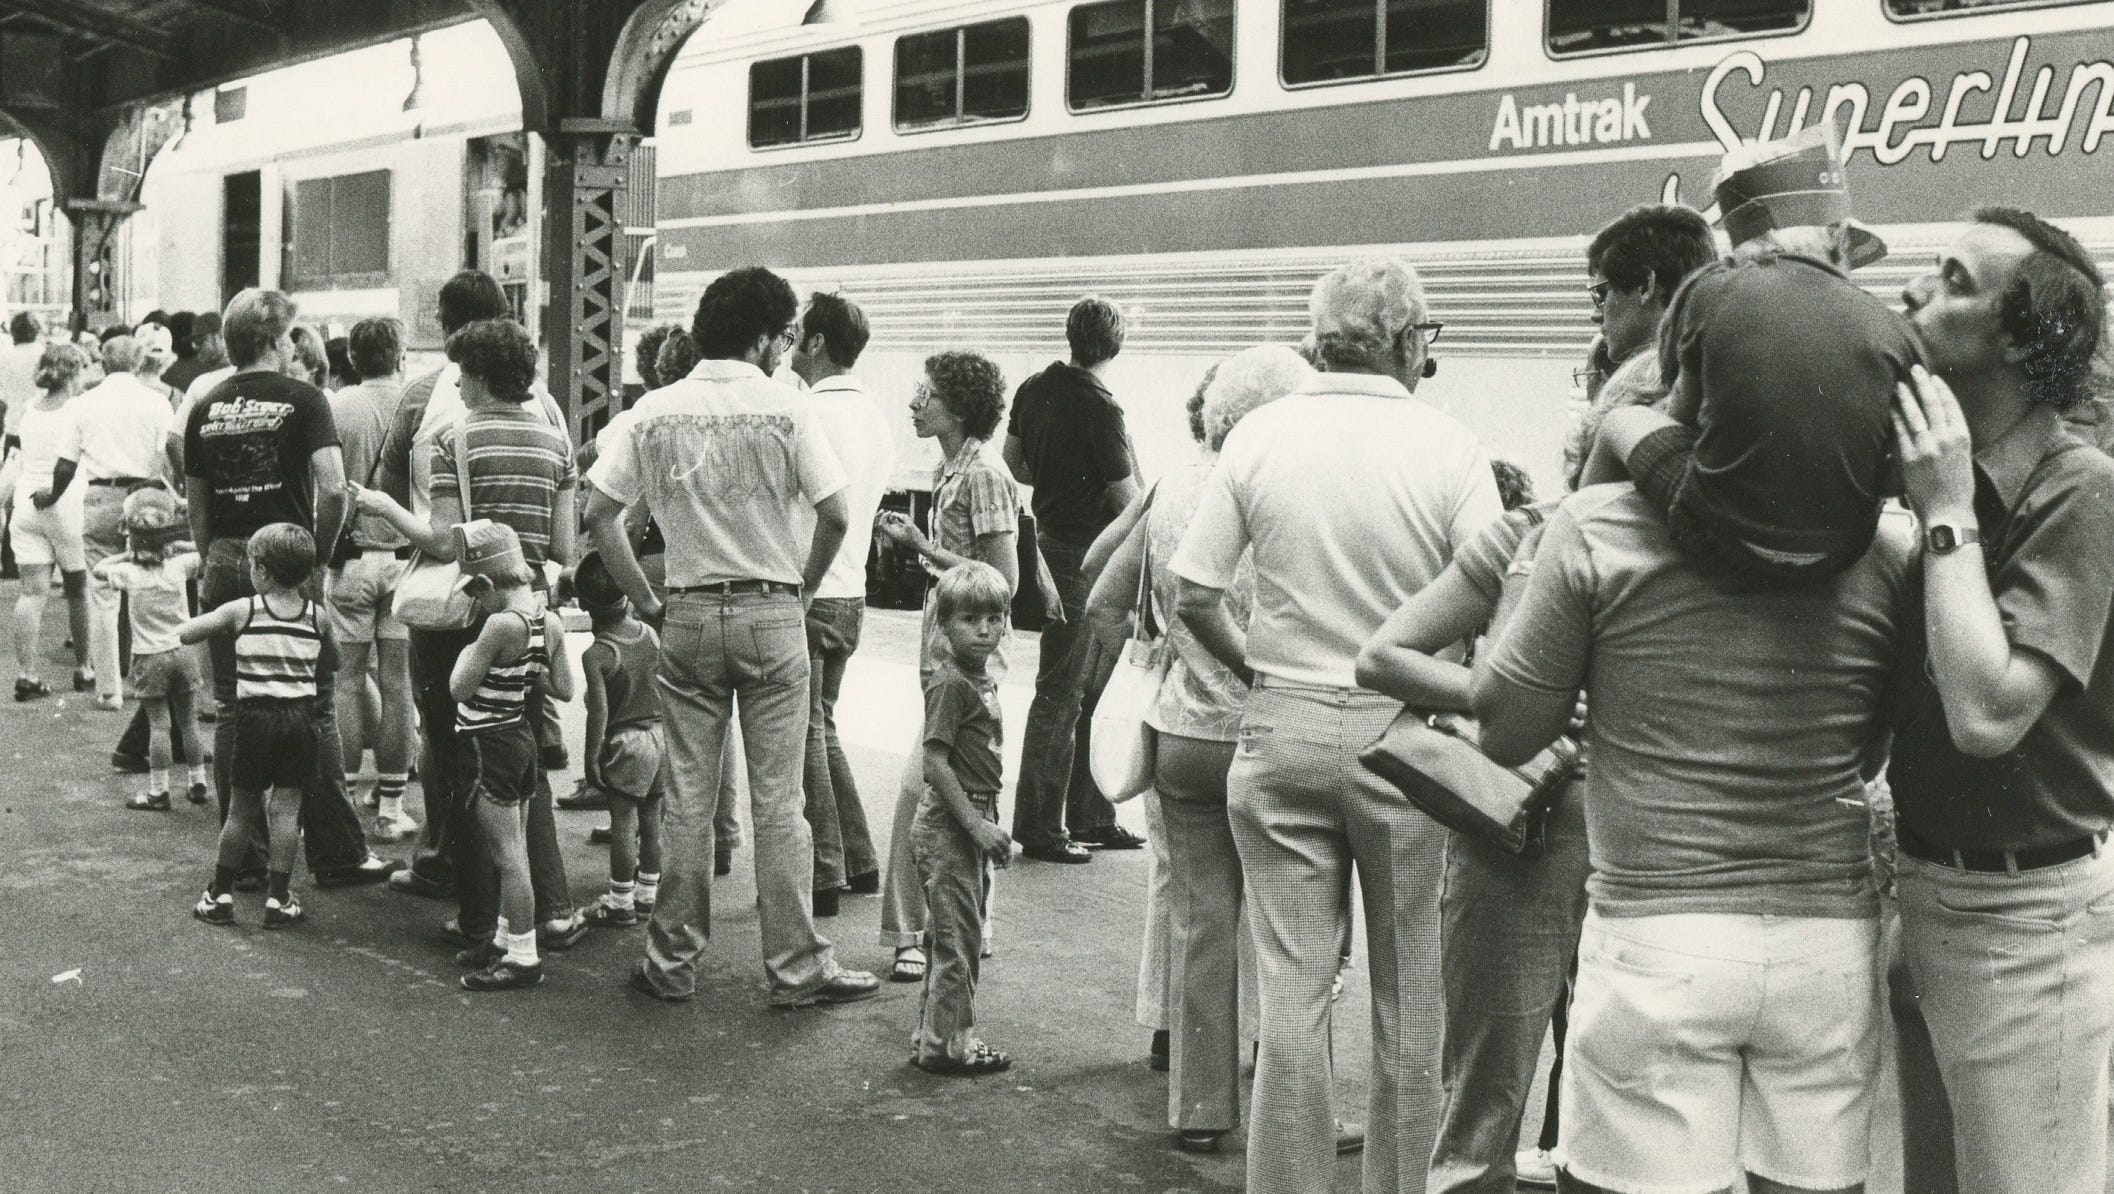 Passengers line up for an Amtrak train on August 2, 1980.